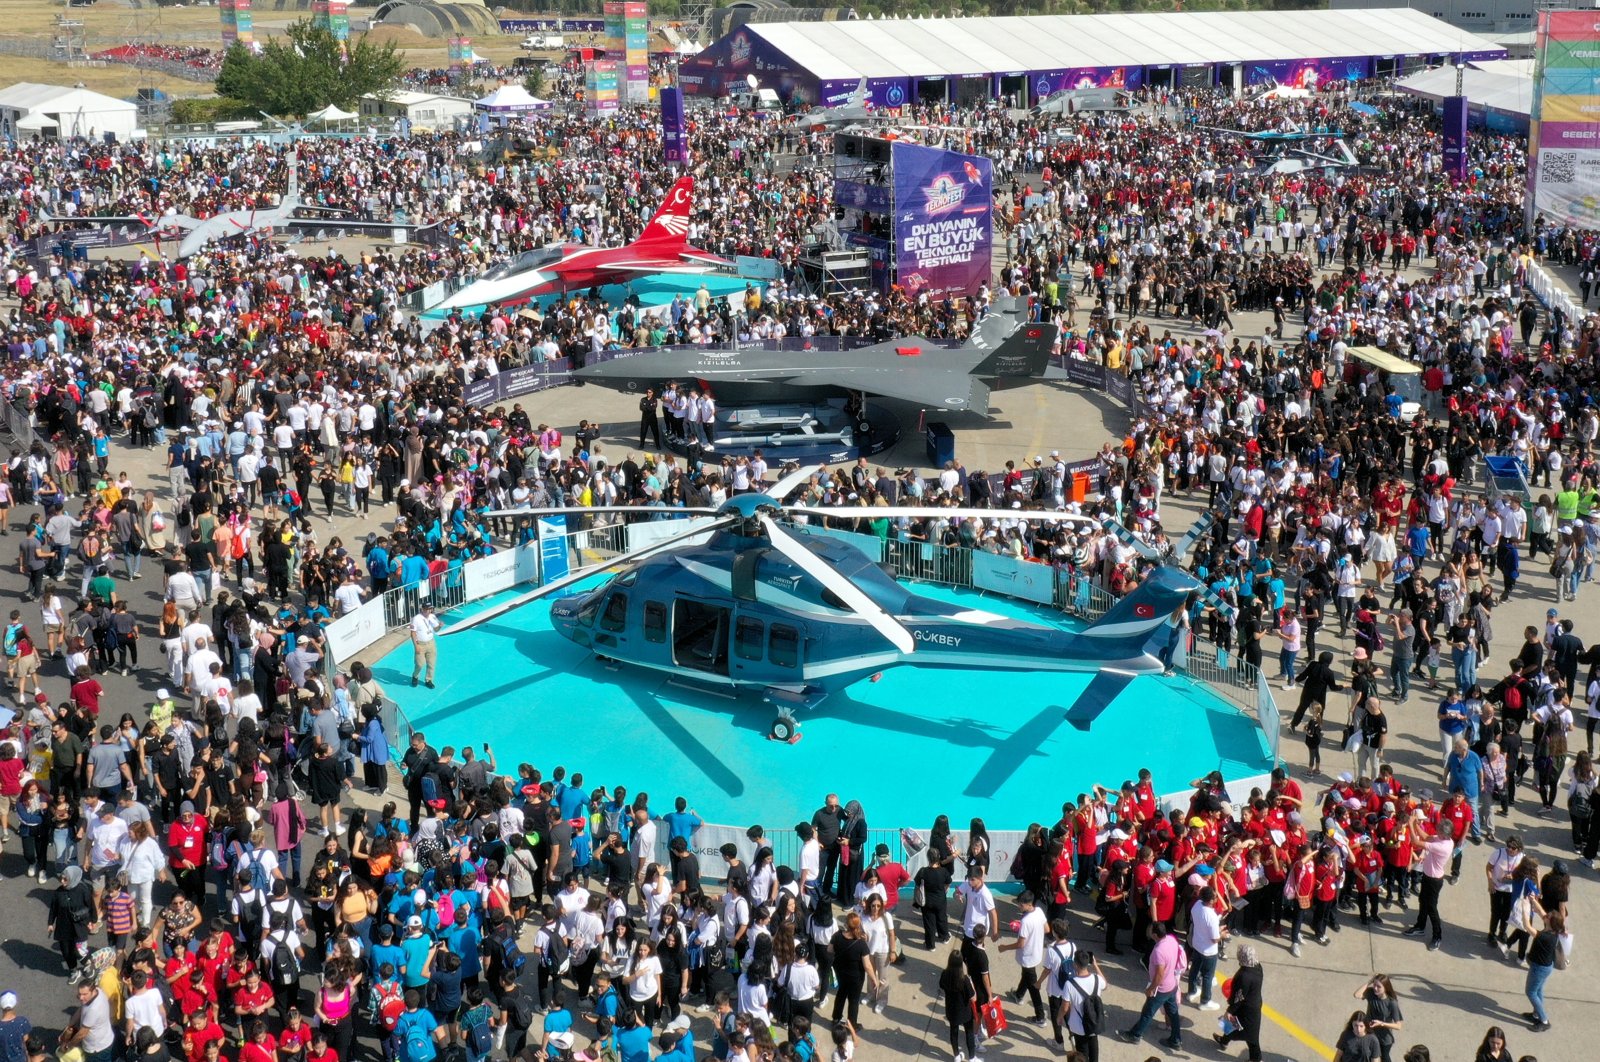 Crowds of visitors are seen surrounding the Gökbey helicopter during the newest Teknofest edition held in Izmir, western Türkiye, Sept. 28, 2023. (AA Photo)